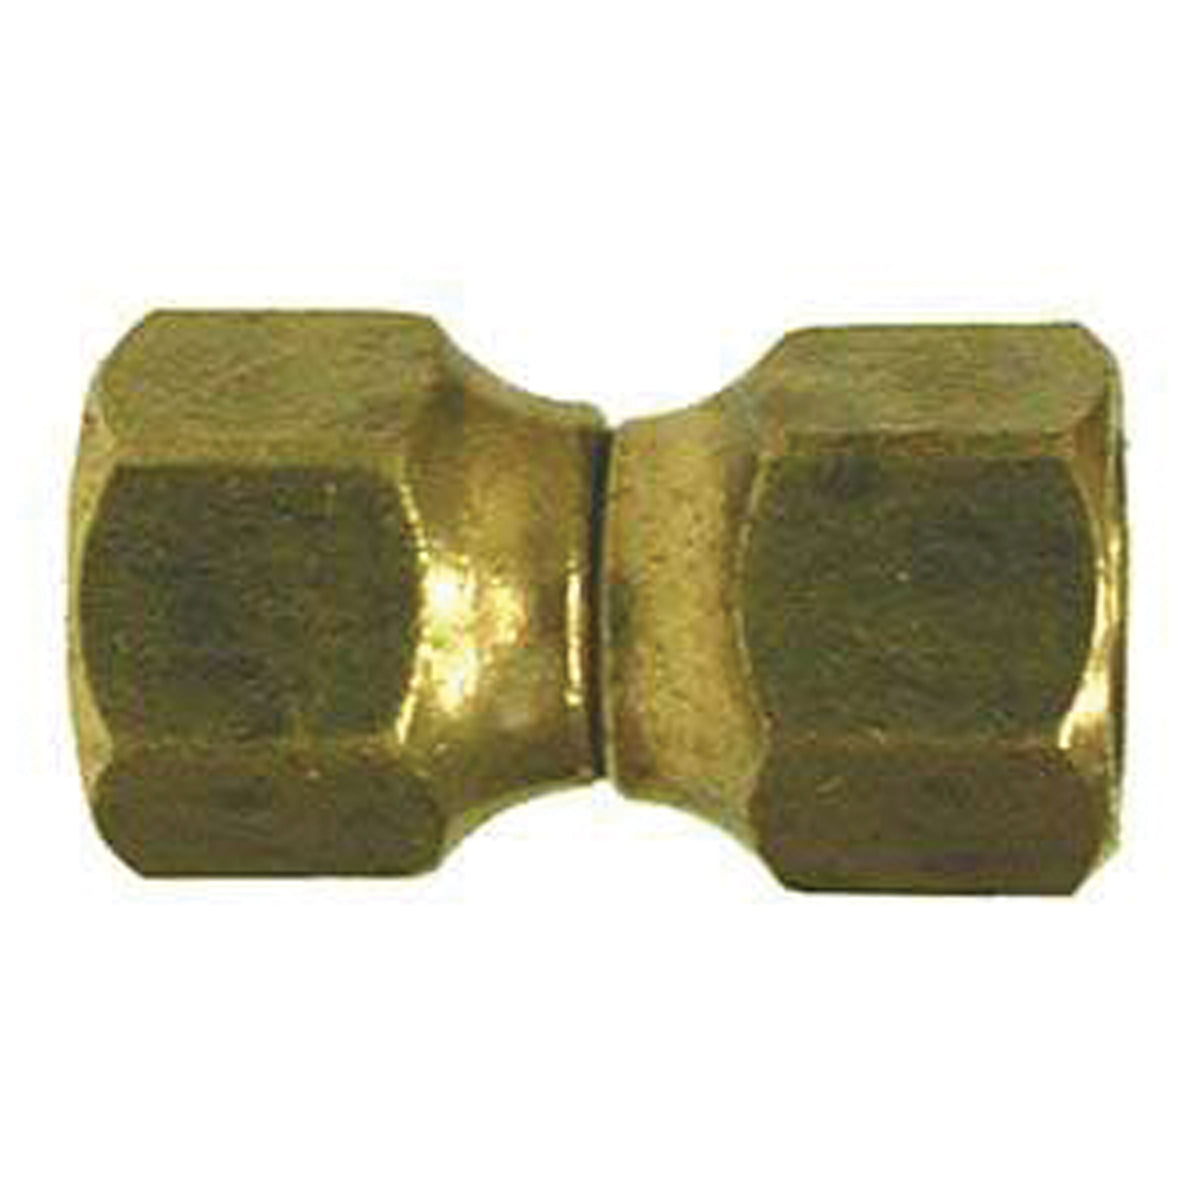 Midland Metal 10-483 SAE 45° Flare Forged Swivel Nut - 3/8 in., Each